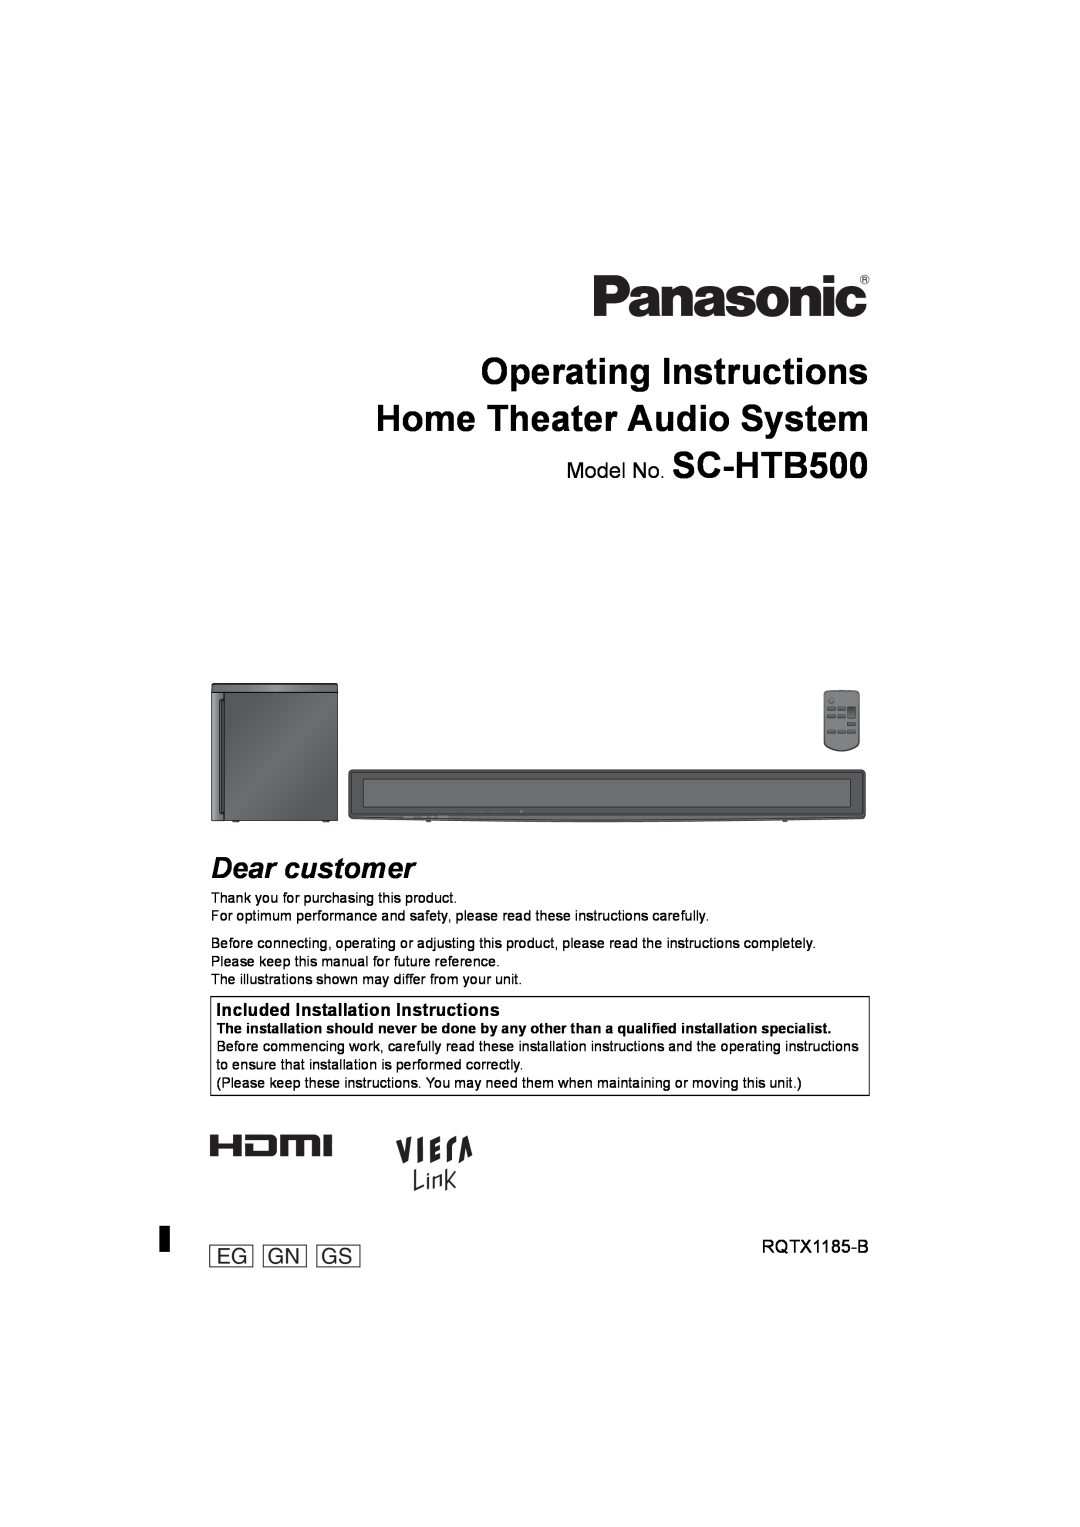 Panasonic operating instructions Operating Instructions Home Theater Audio System, Model No. SC-HTB500, RQTX1185-B 